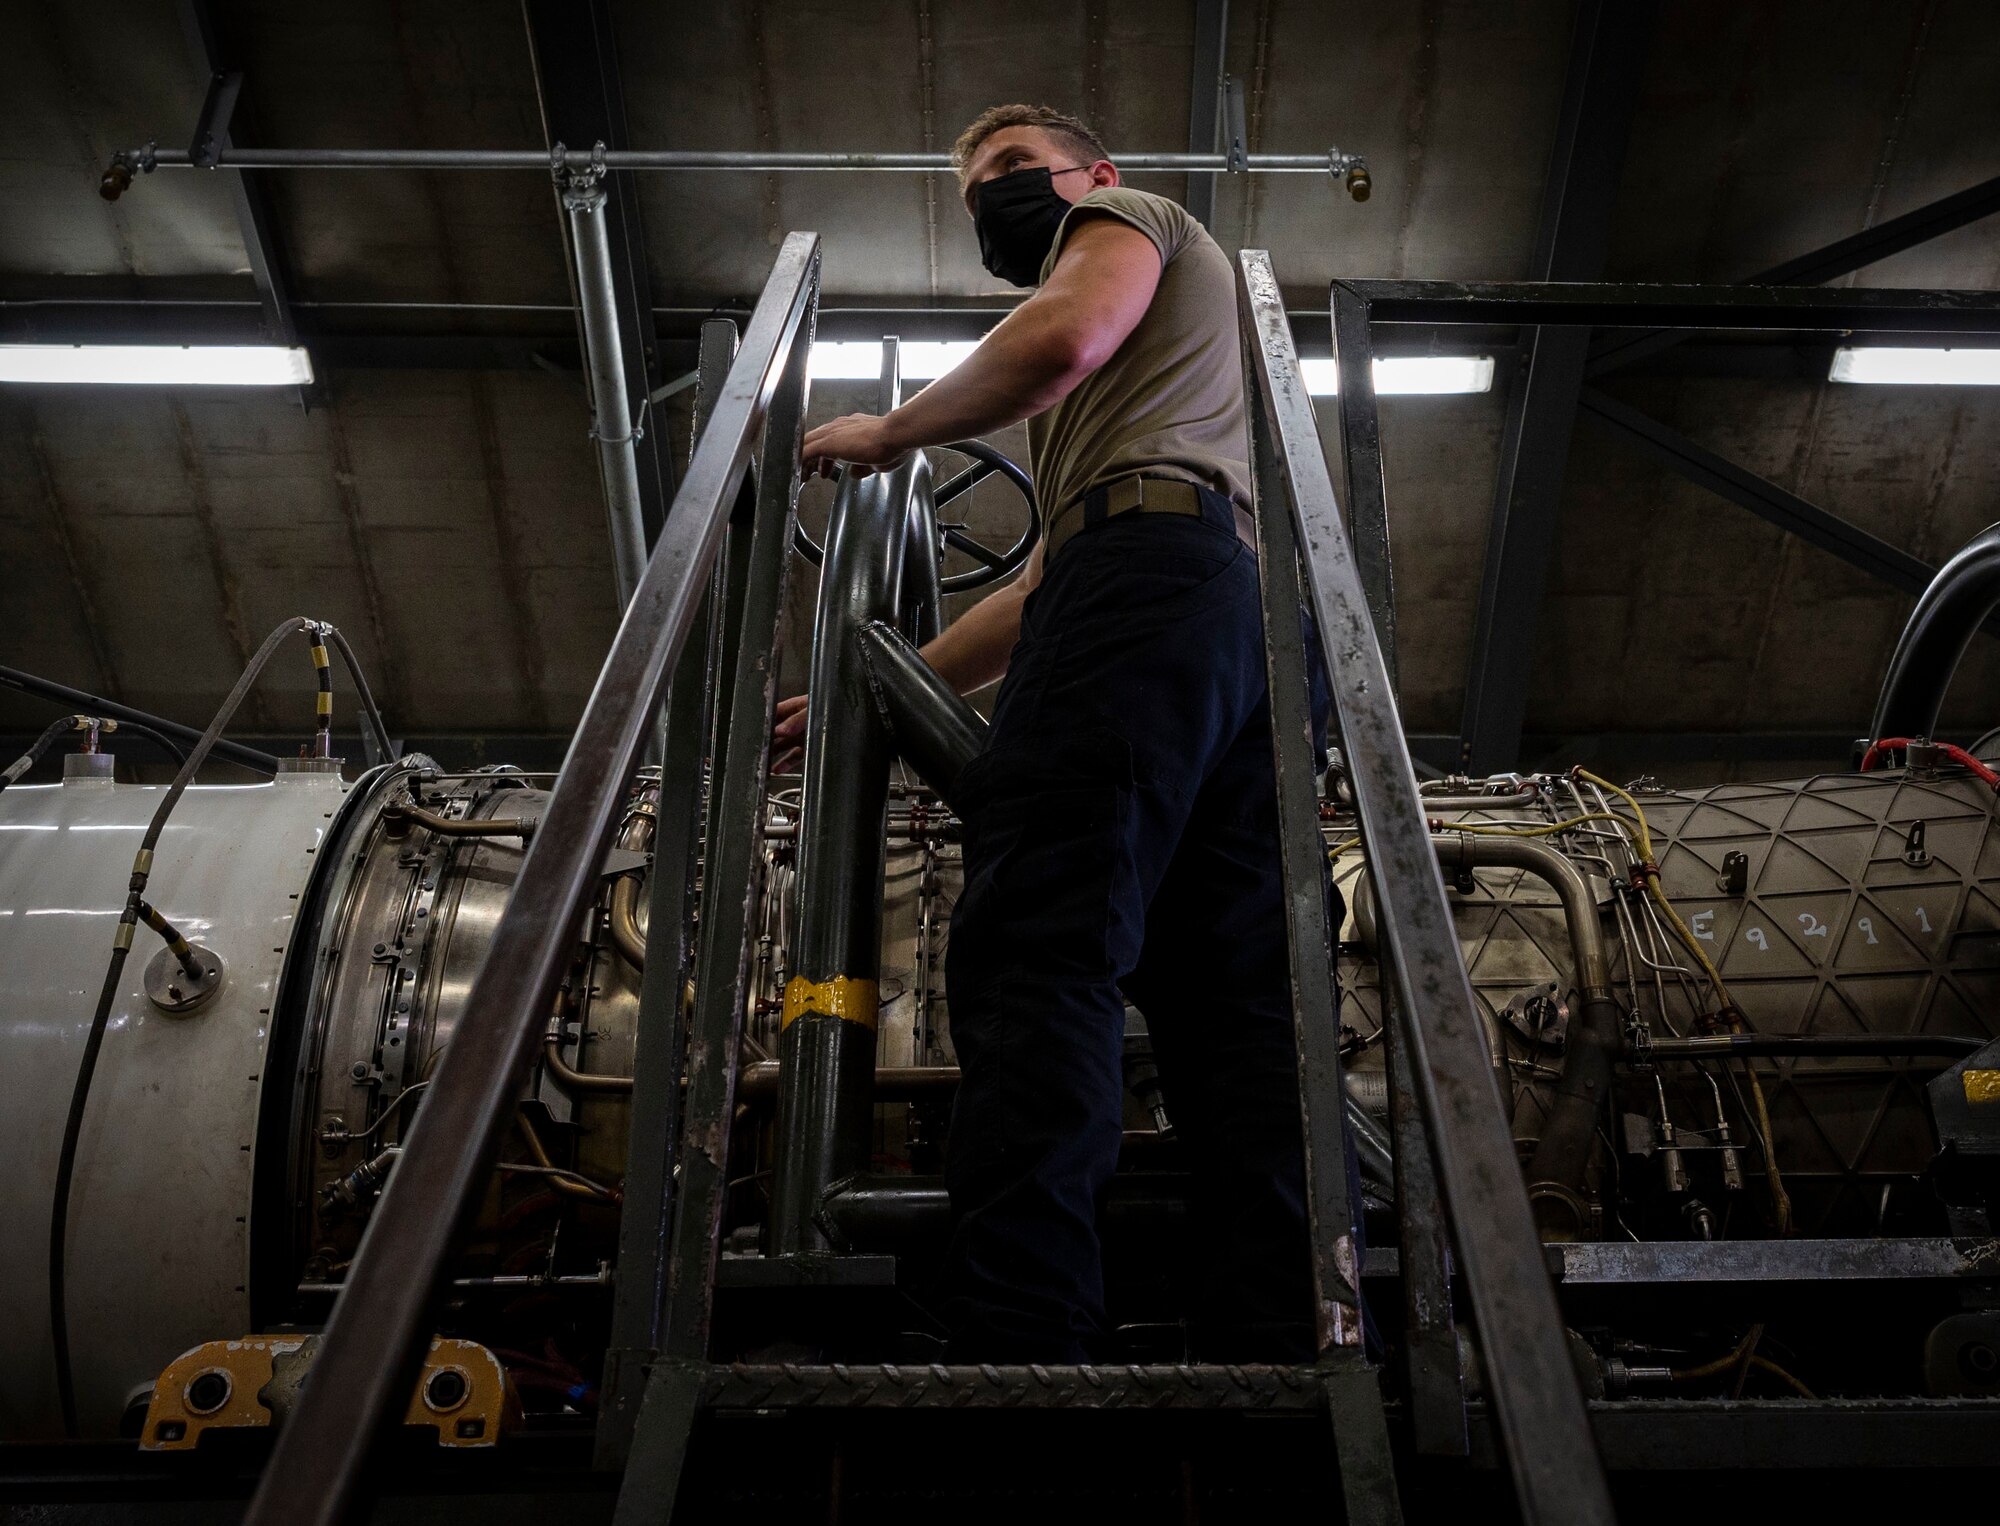 Airman 1st Class Noah Mercer, 4th Component Maintenance Squadron aerospace propulsion technician, inspects the engine of an F-15E Strike Eagle at Seymour Johnson Air Force Base, North Carolina, August 10, 2022. The engine test cell simulates aircraft fire in a specialized hangar, known as a hush house, to ensure that all components of the F-15E engine are functioning properly before use. (U.S. Air Force photo by Airman 1st Class Sabrina Fuller)